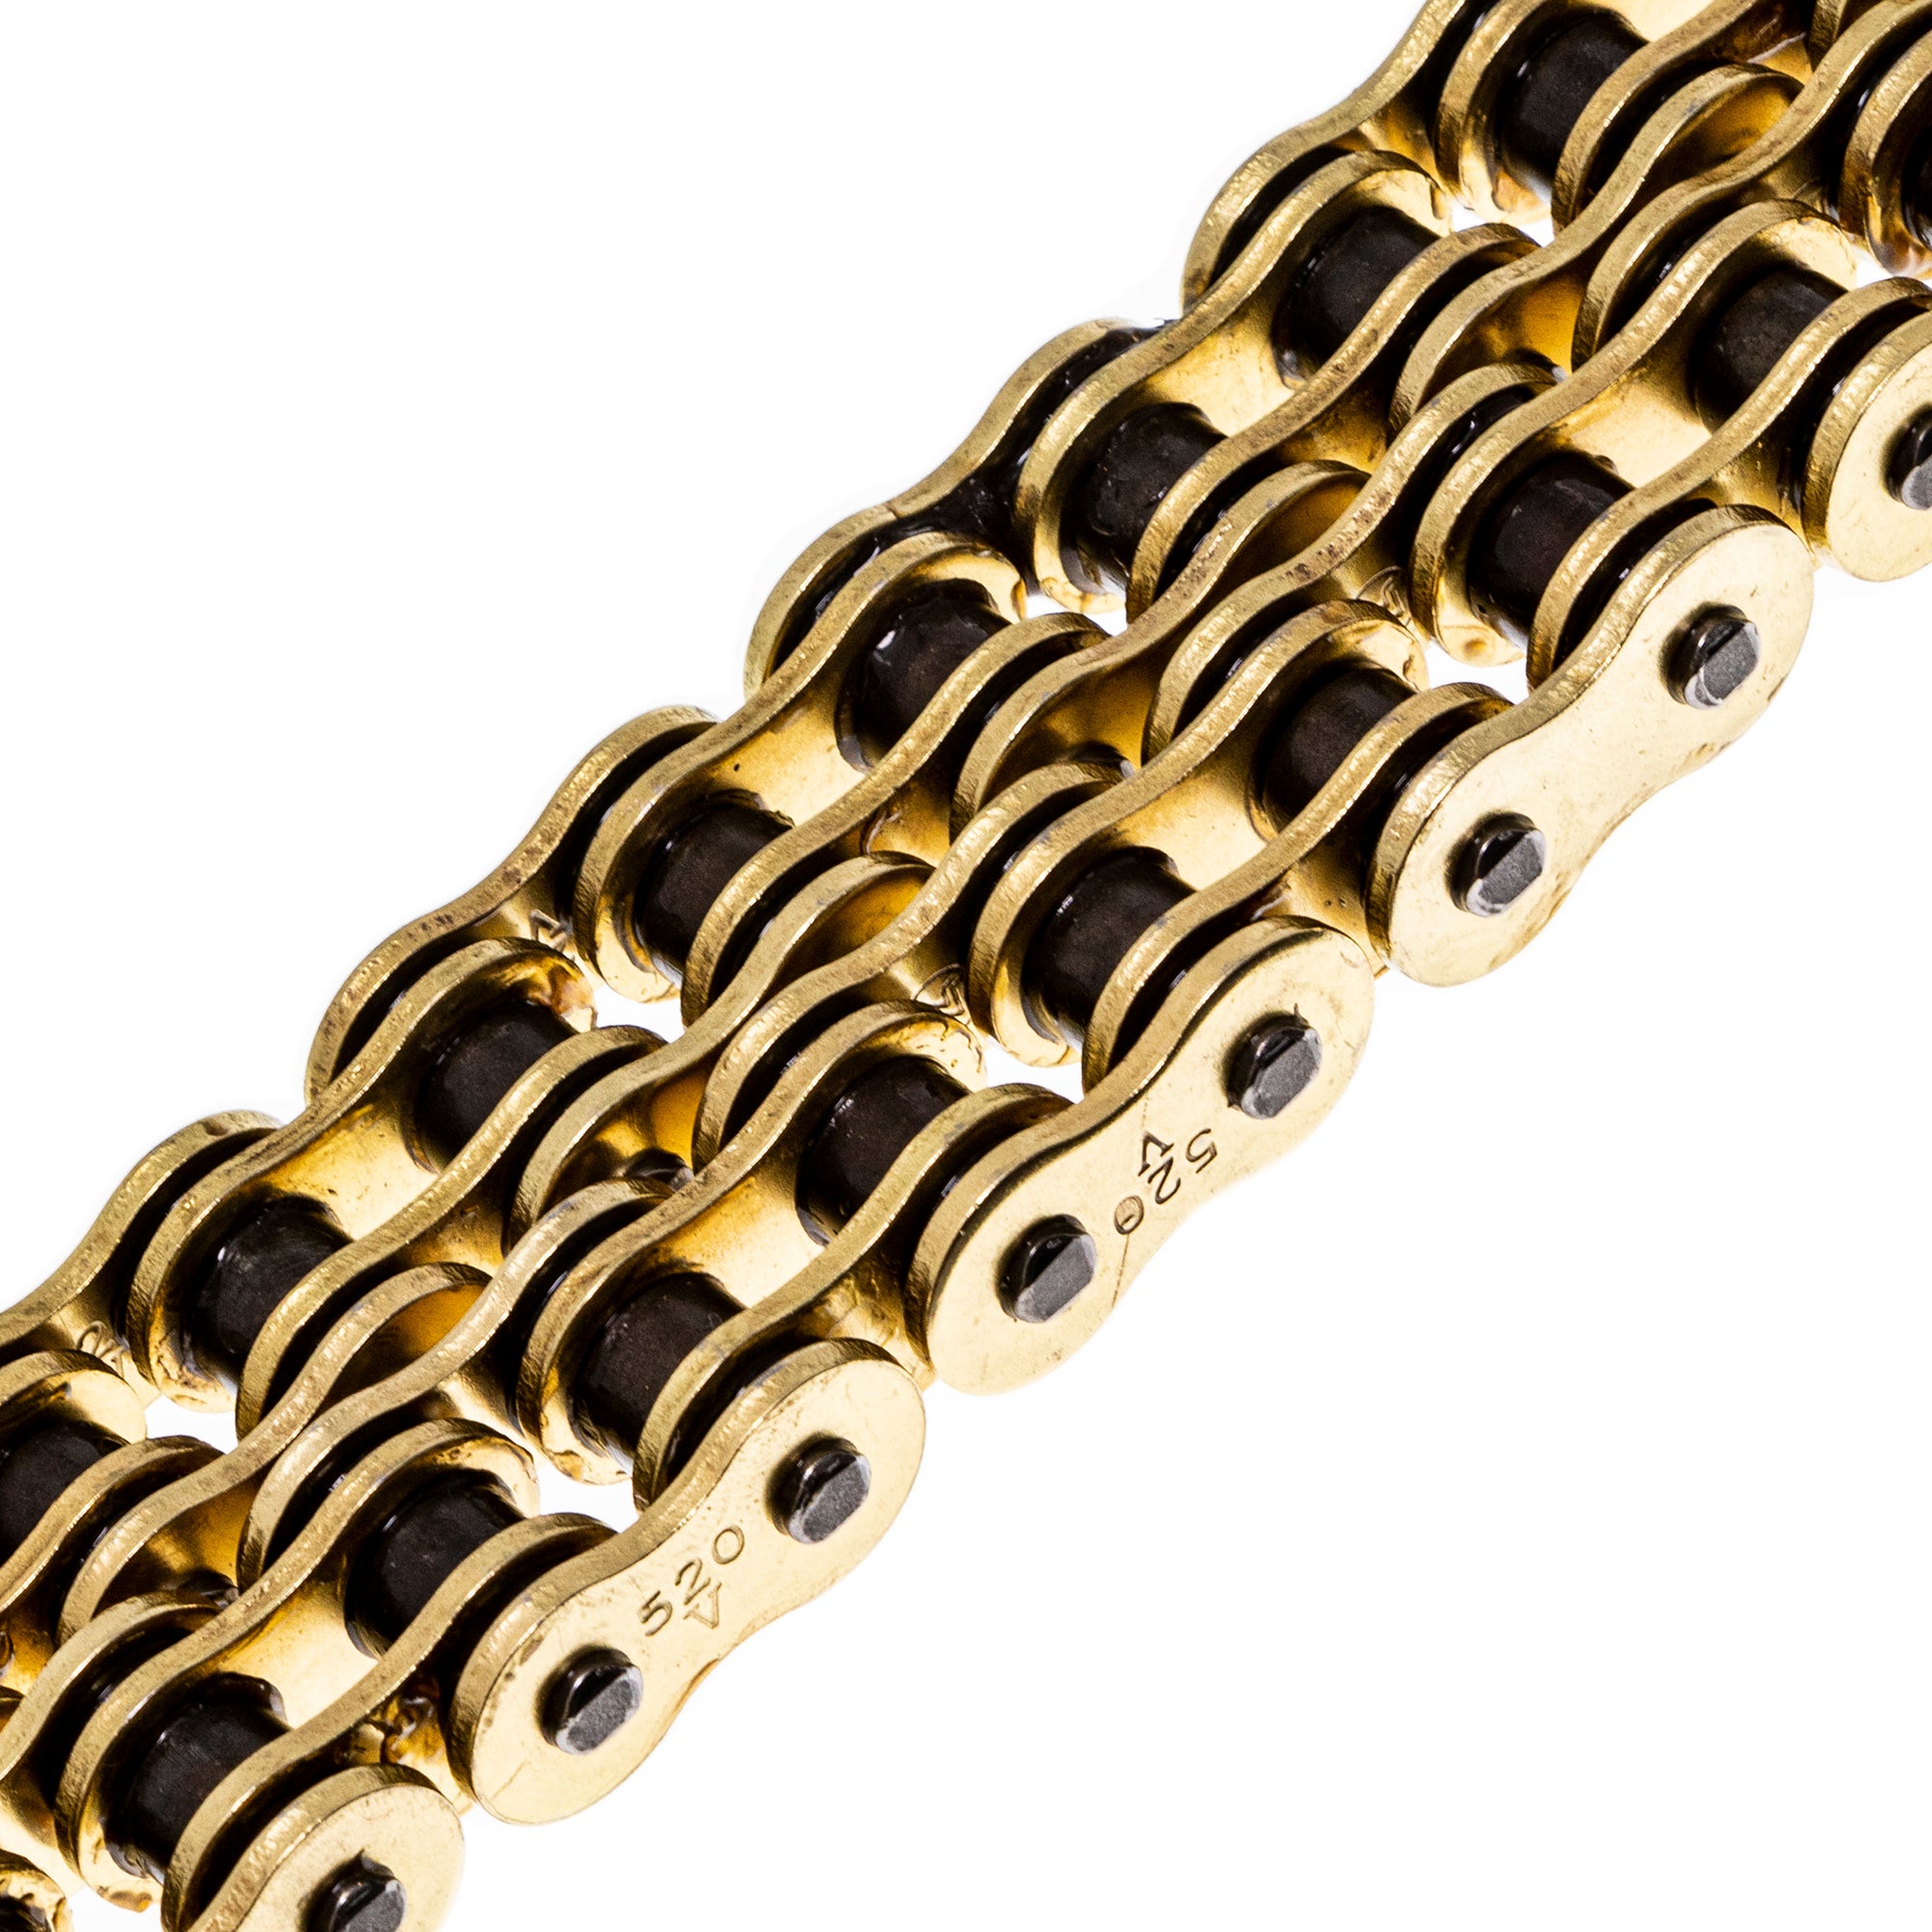 Gold X-Ring Chain 92 w/ Master Link for zOTHER Yamaha Victory Polaris TY350 Raptor NICHE 519-CDC2418H